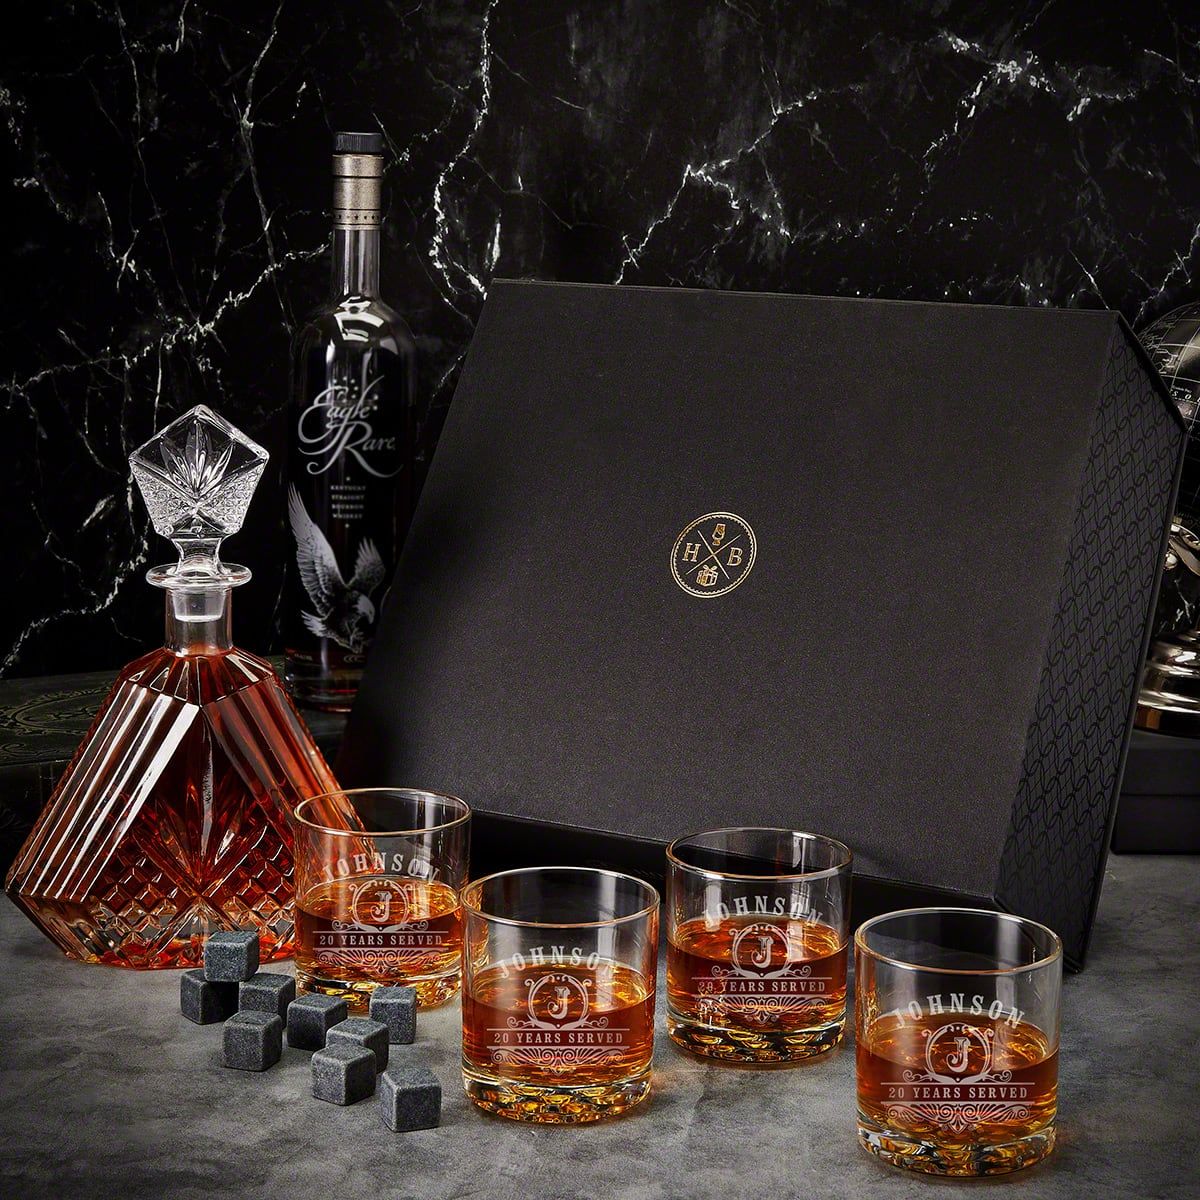 https://images.homewetbar.com/media/catalog/product/e/n/engraved-dublin-triangle-crystal-whiskey-decanter-set-carraway-p-10833.jpg?store=default&image-type=image